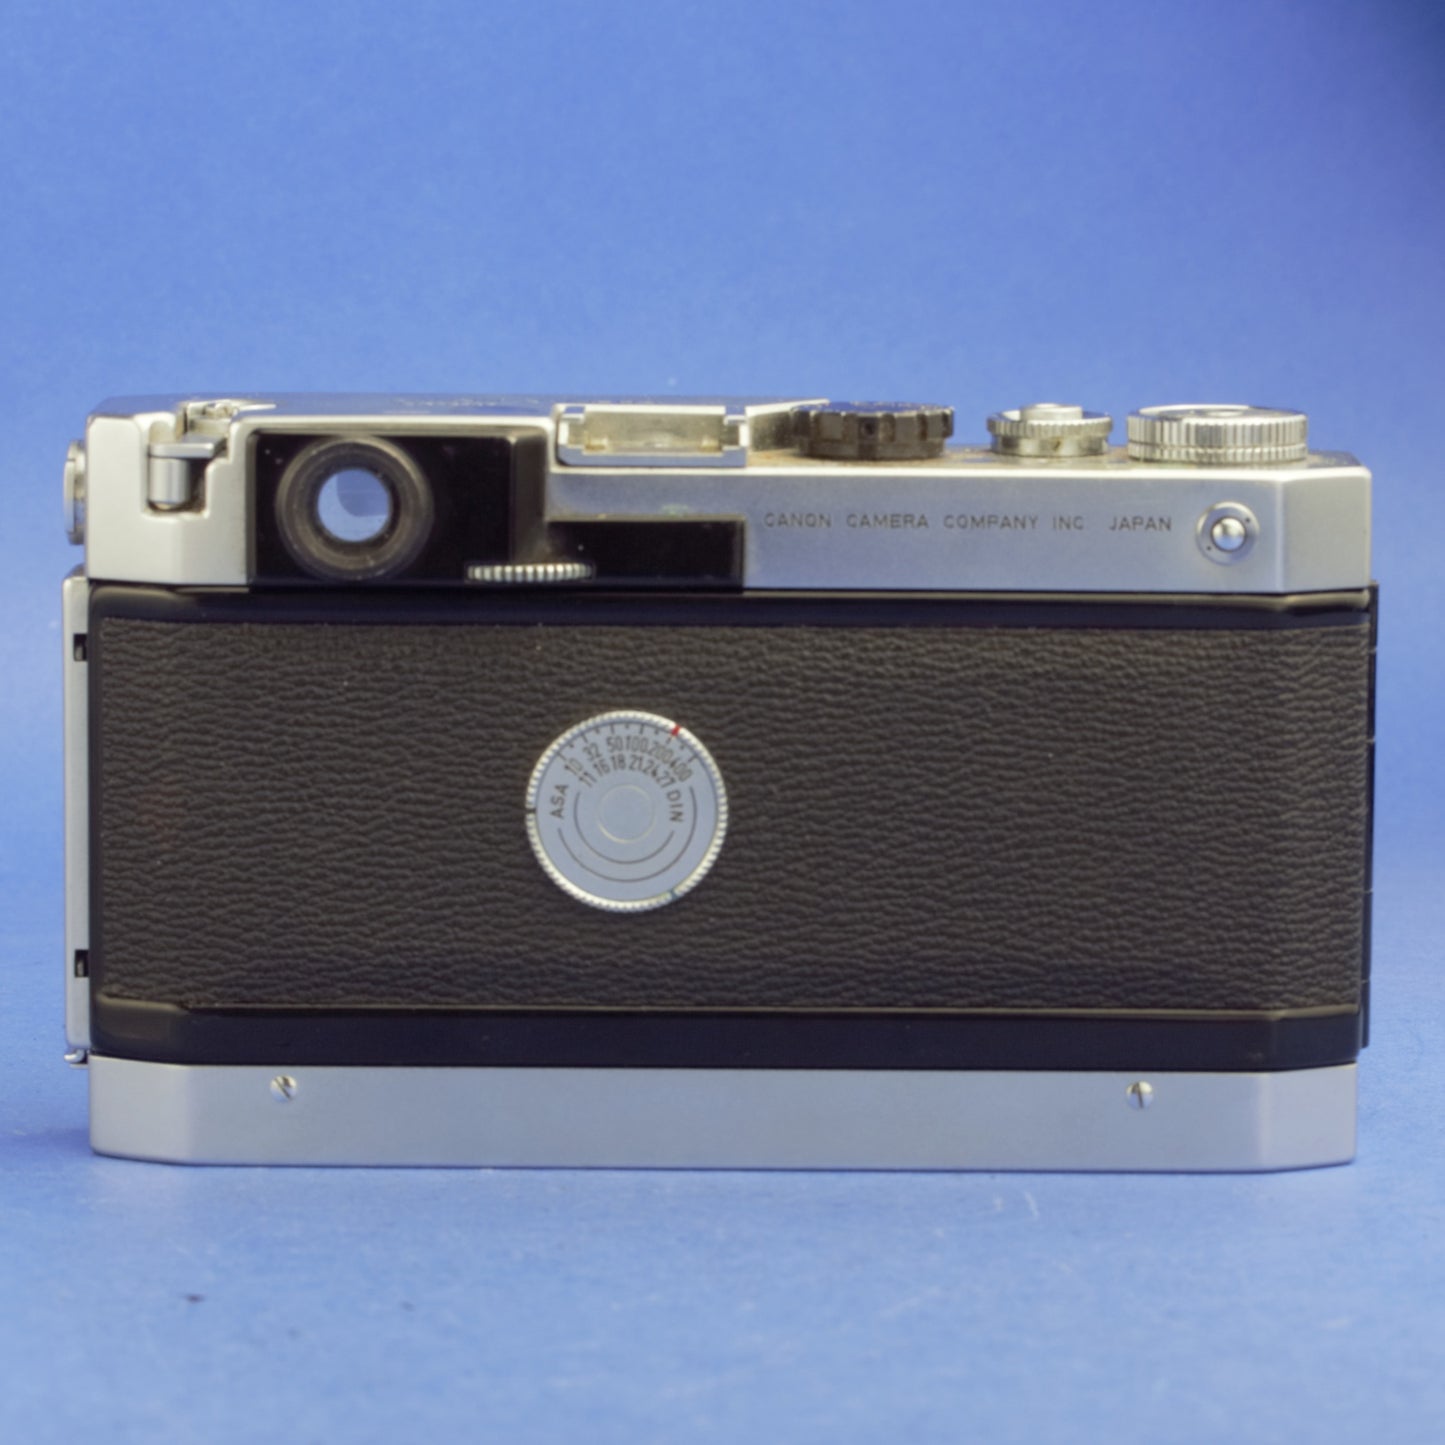 Canon VI-T EP Rangefinder Camera Body Not Working